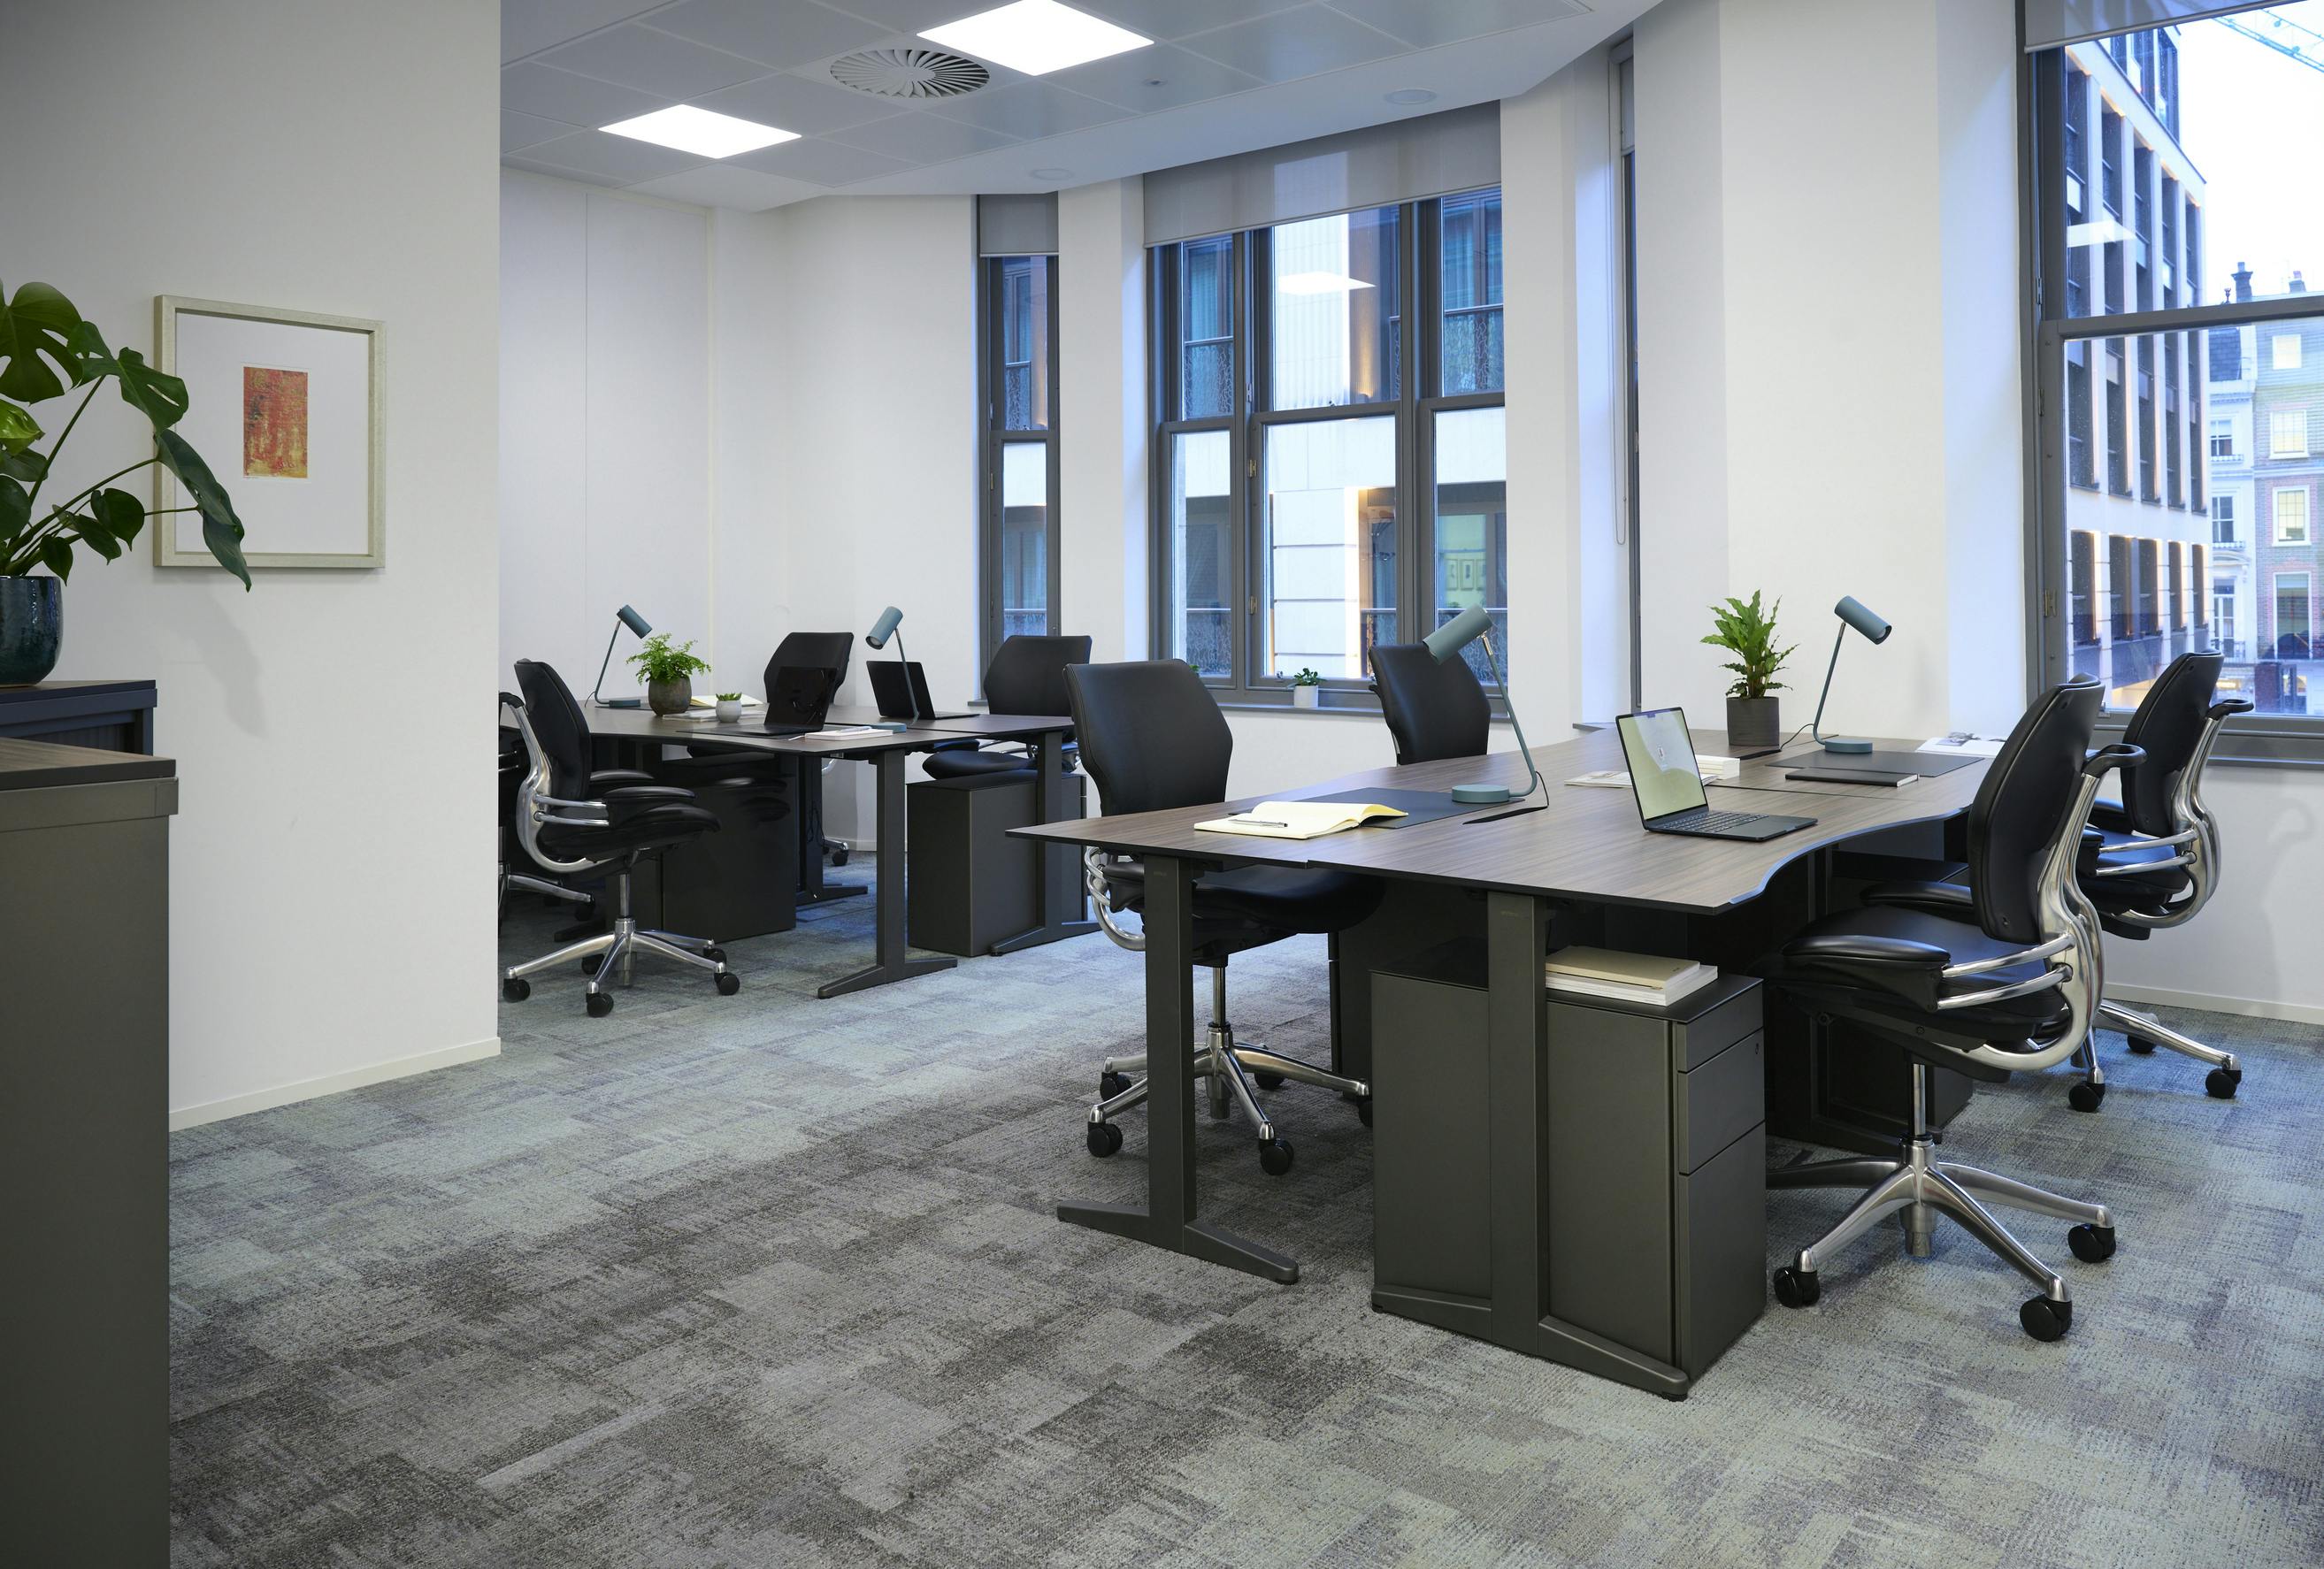 Green Park - 14 Person office - Bolton Street 